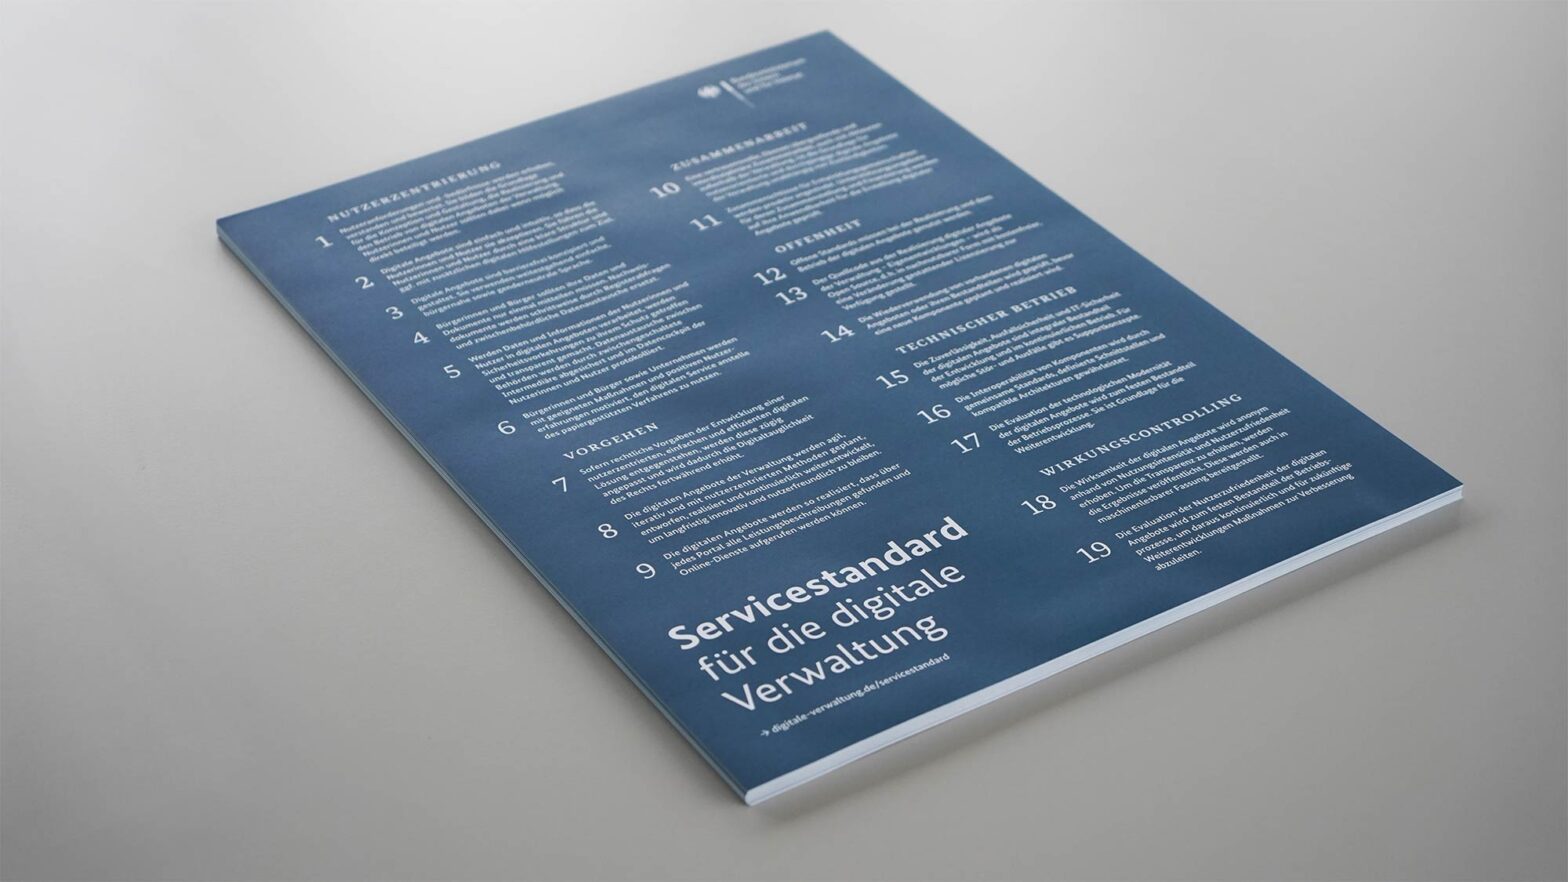 A pile of blue posters on a clean light grey surface – posters contain 19 numbered paragraphs and the headline: Service standard for the digital administration – in German